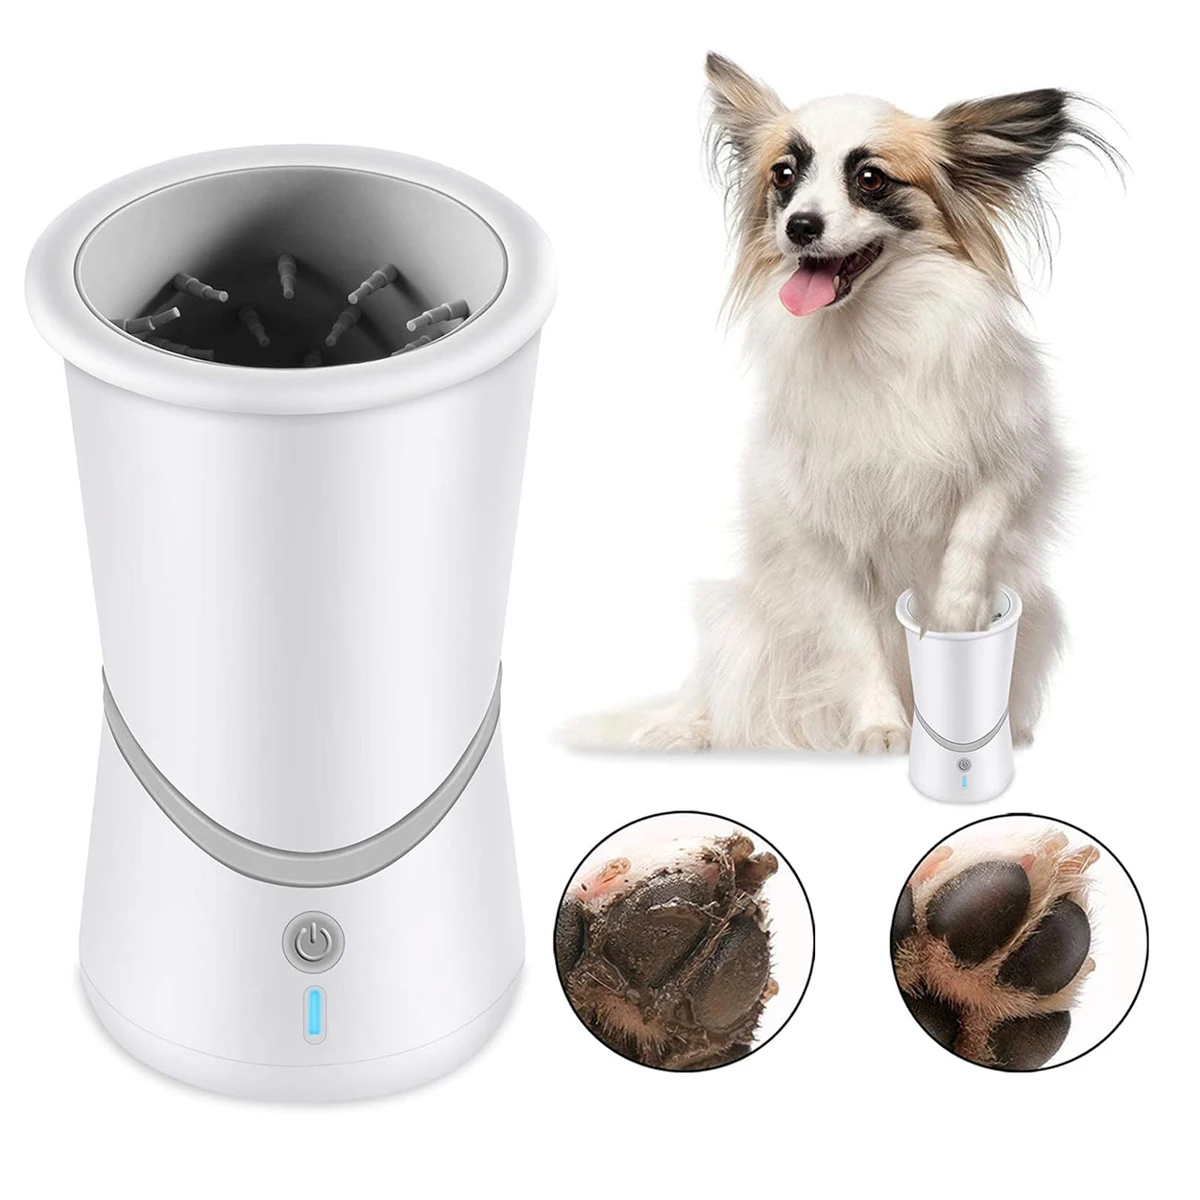 

Electric Paw Cleaner For Dogs Portable Removable 2 In 1 Dog Paw Cleaner Fit For Pet Massage Care Dirty Claws Dog Accessories